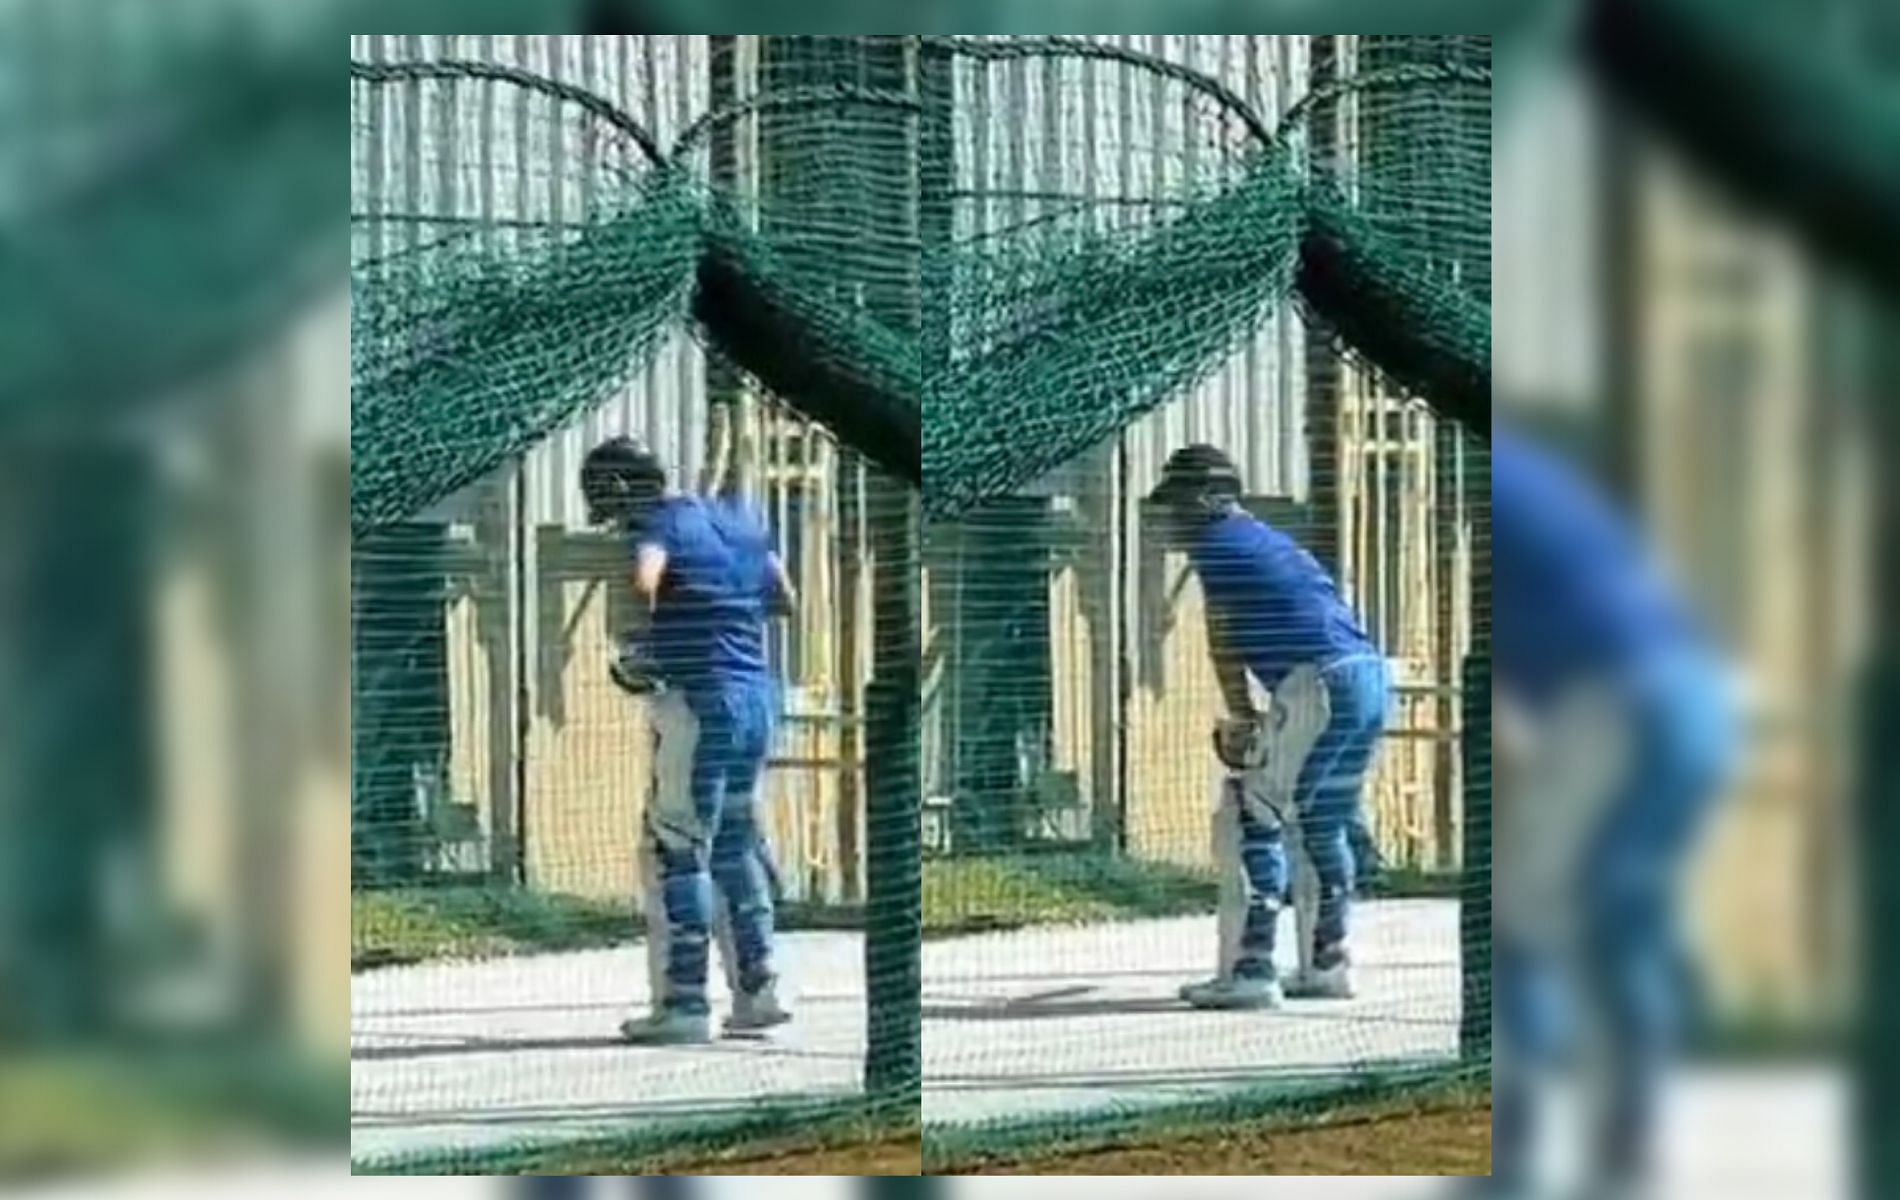 MS Dhoni bats in the nets. (Image: Twitter)